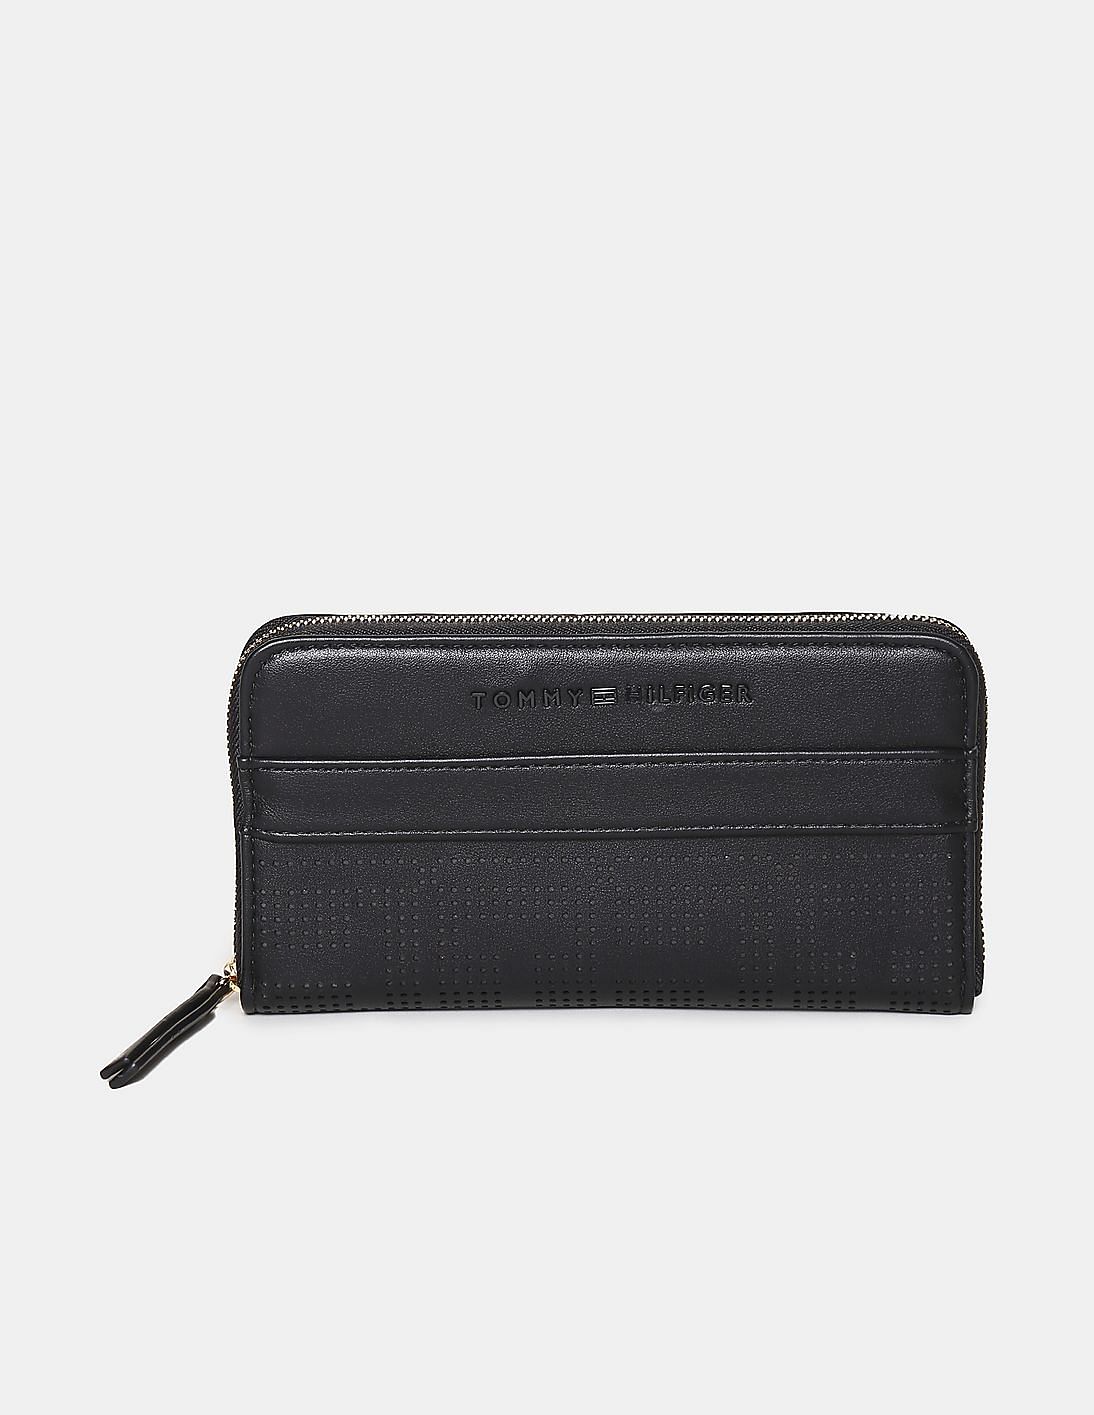 Buy Tommy Hilfiger Women Black Perforated Carrie Zip Wallet - NNNOW.com